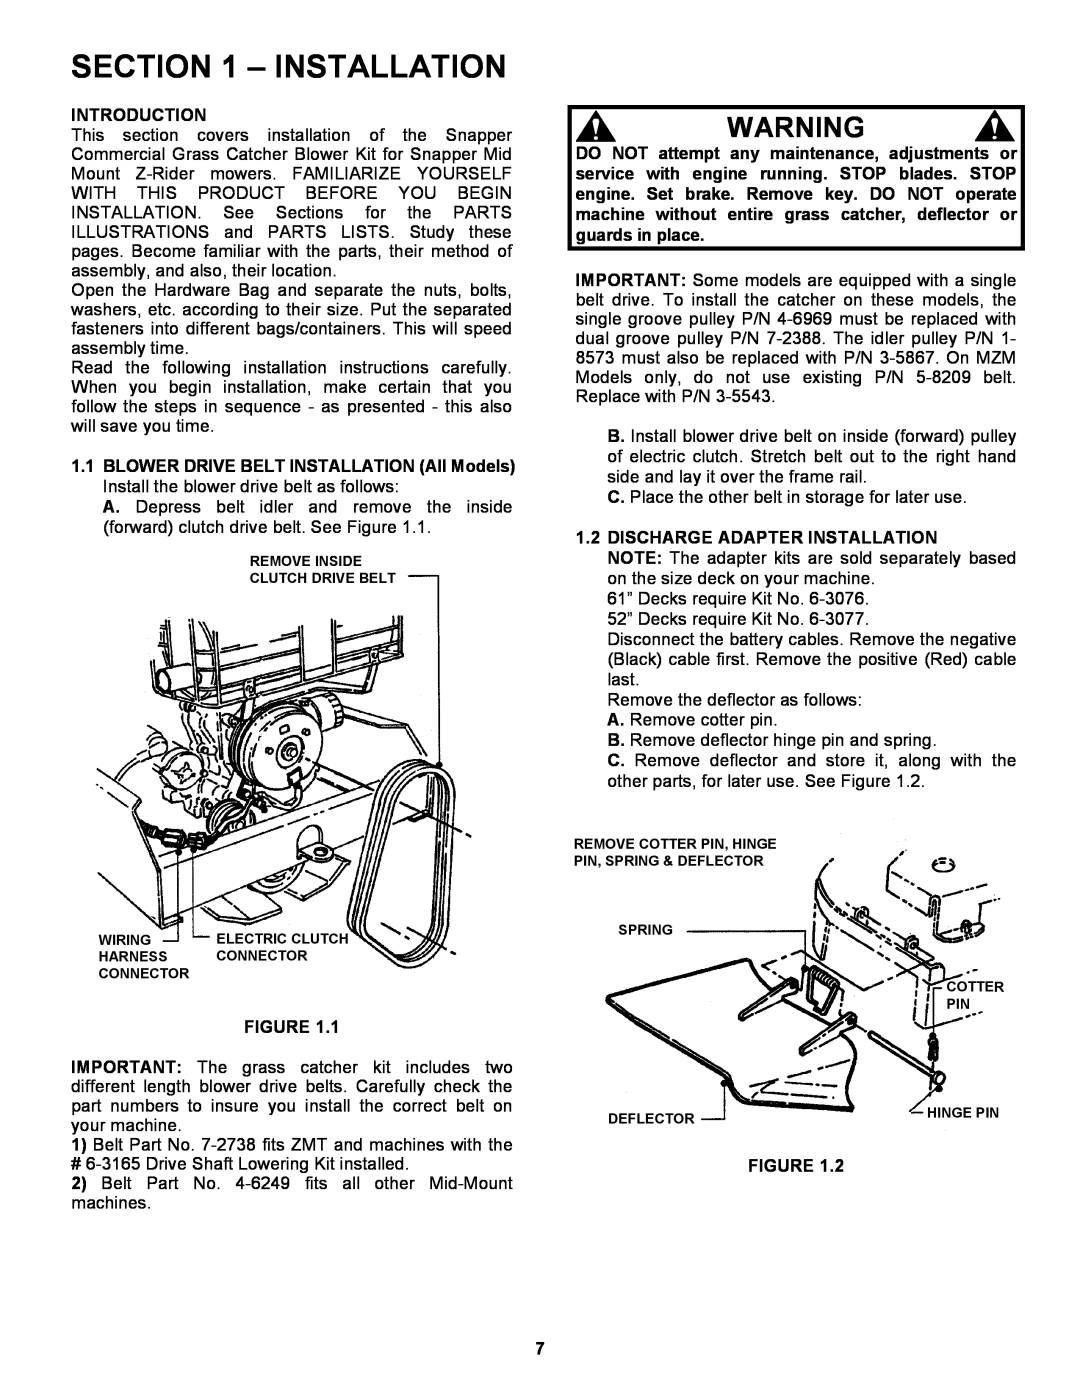 Snapper 7-3571, 6-3162 manual Installation, Introduction, 1.2DISCHARGE ADAPTER INSTALLATION 